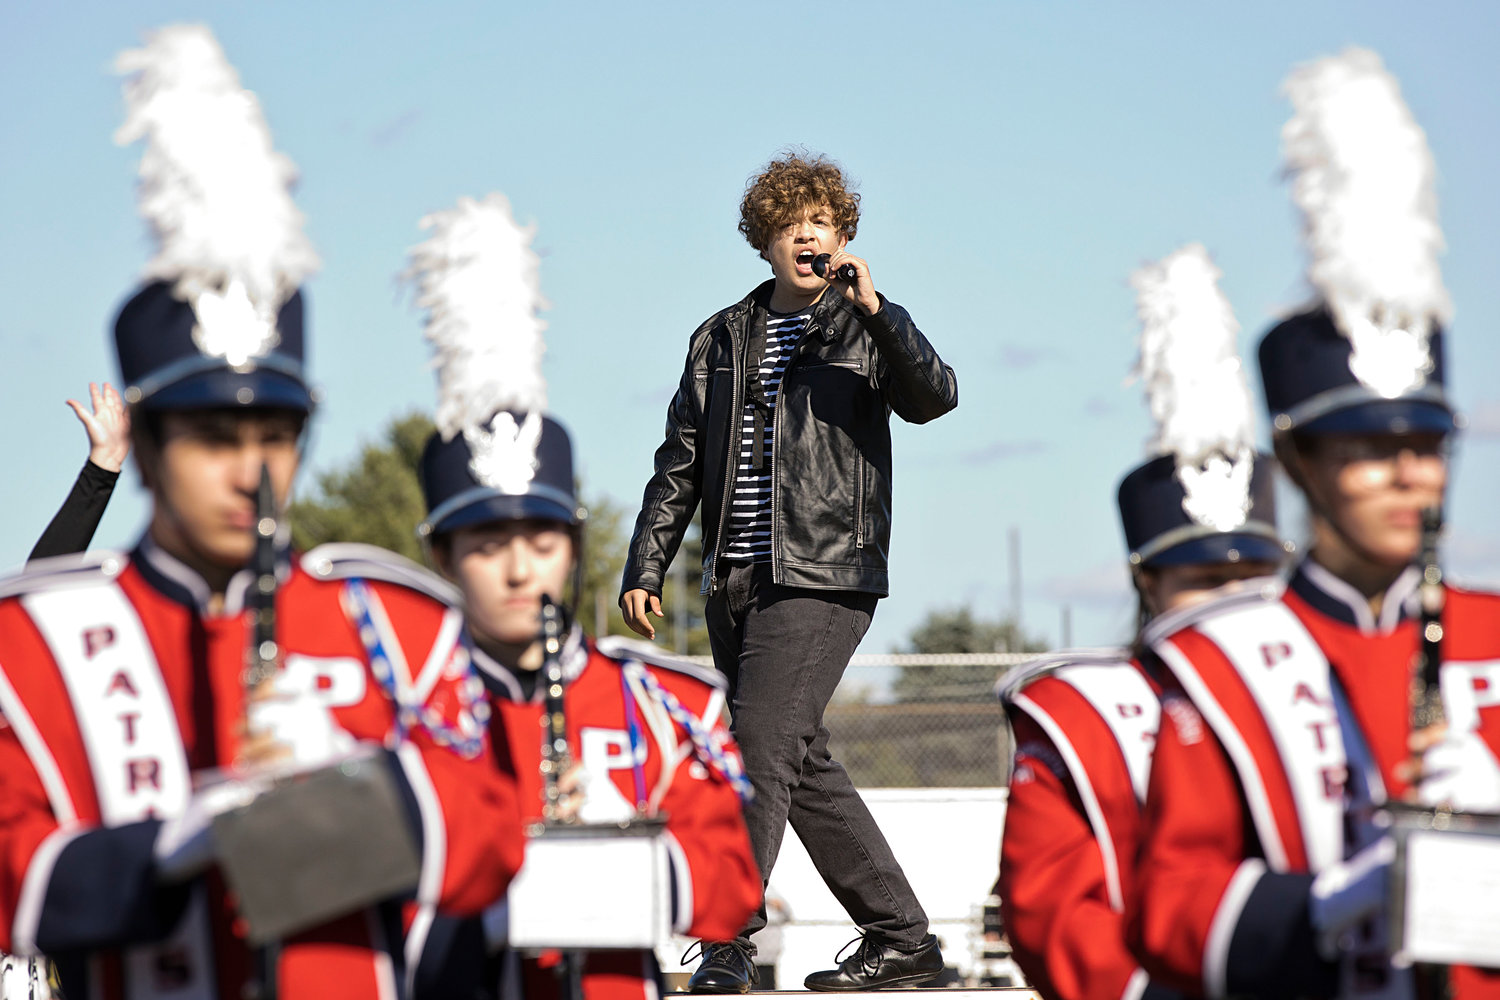 Sophomore Dillion Fesmire plays the king of rock and roll while singing along to the band during halftime of the game, won by the Patriots, 14-7.